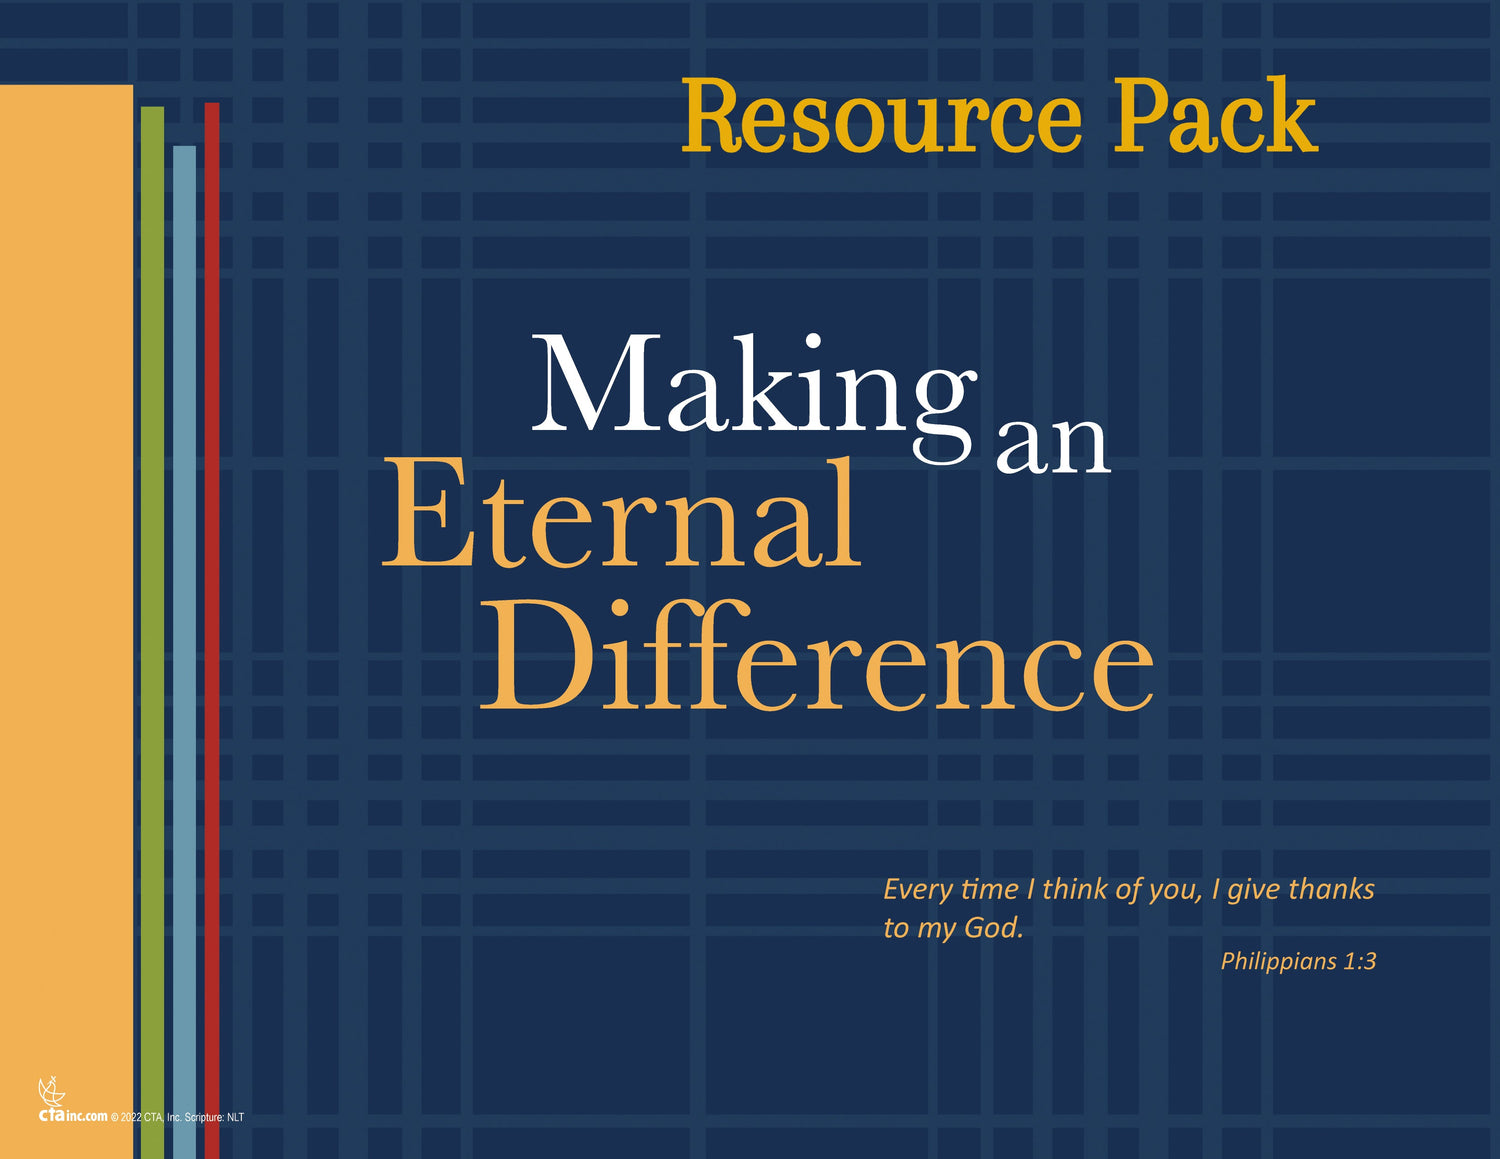 Resource Pack - Making an Eternal Difference